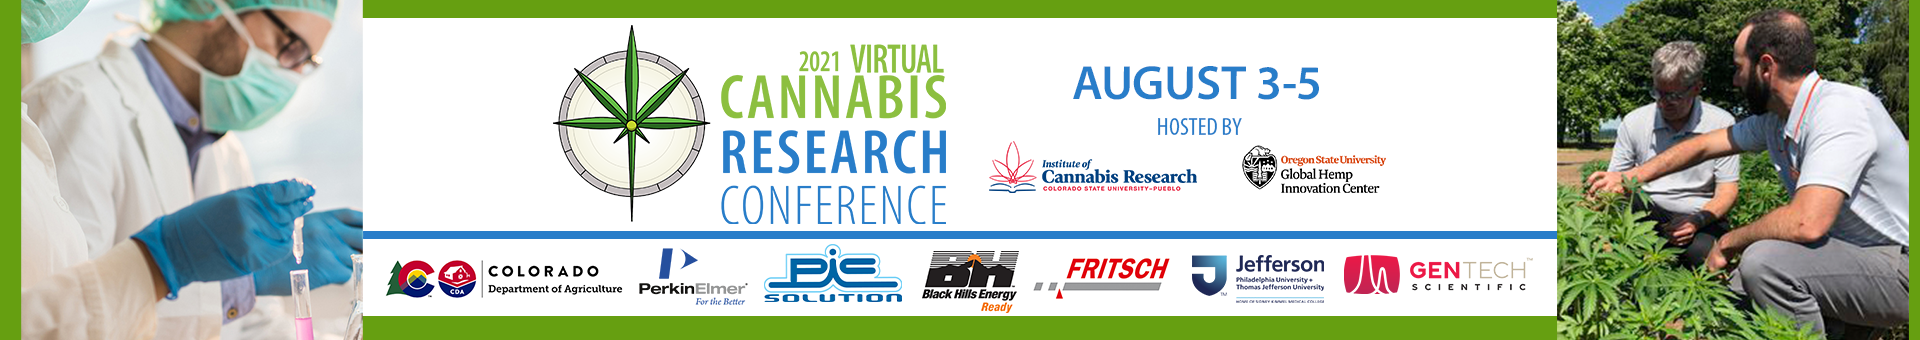 The banner to welcome you to 2021 Virtual Cannabis Research Conference 